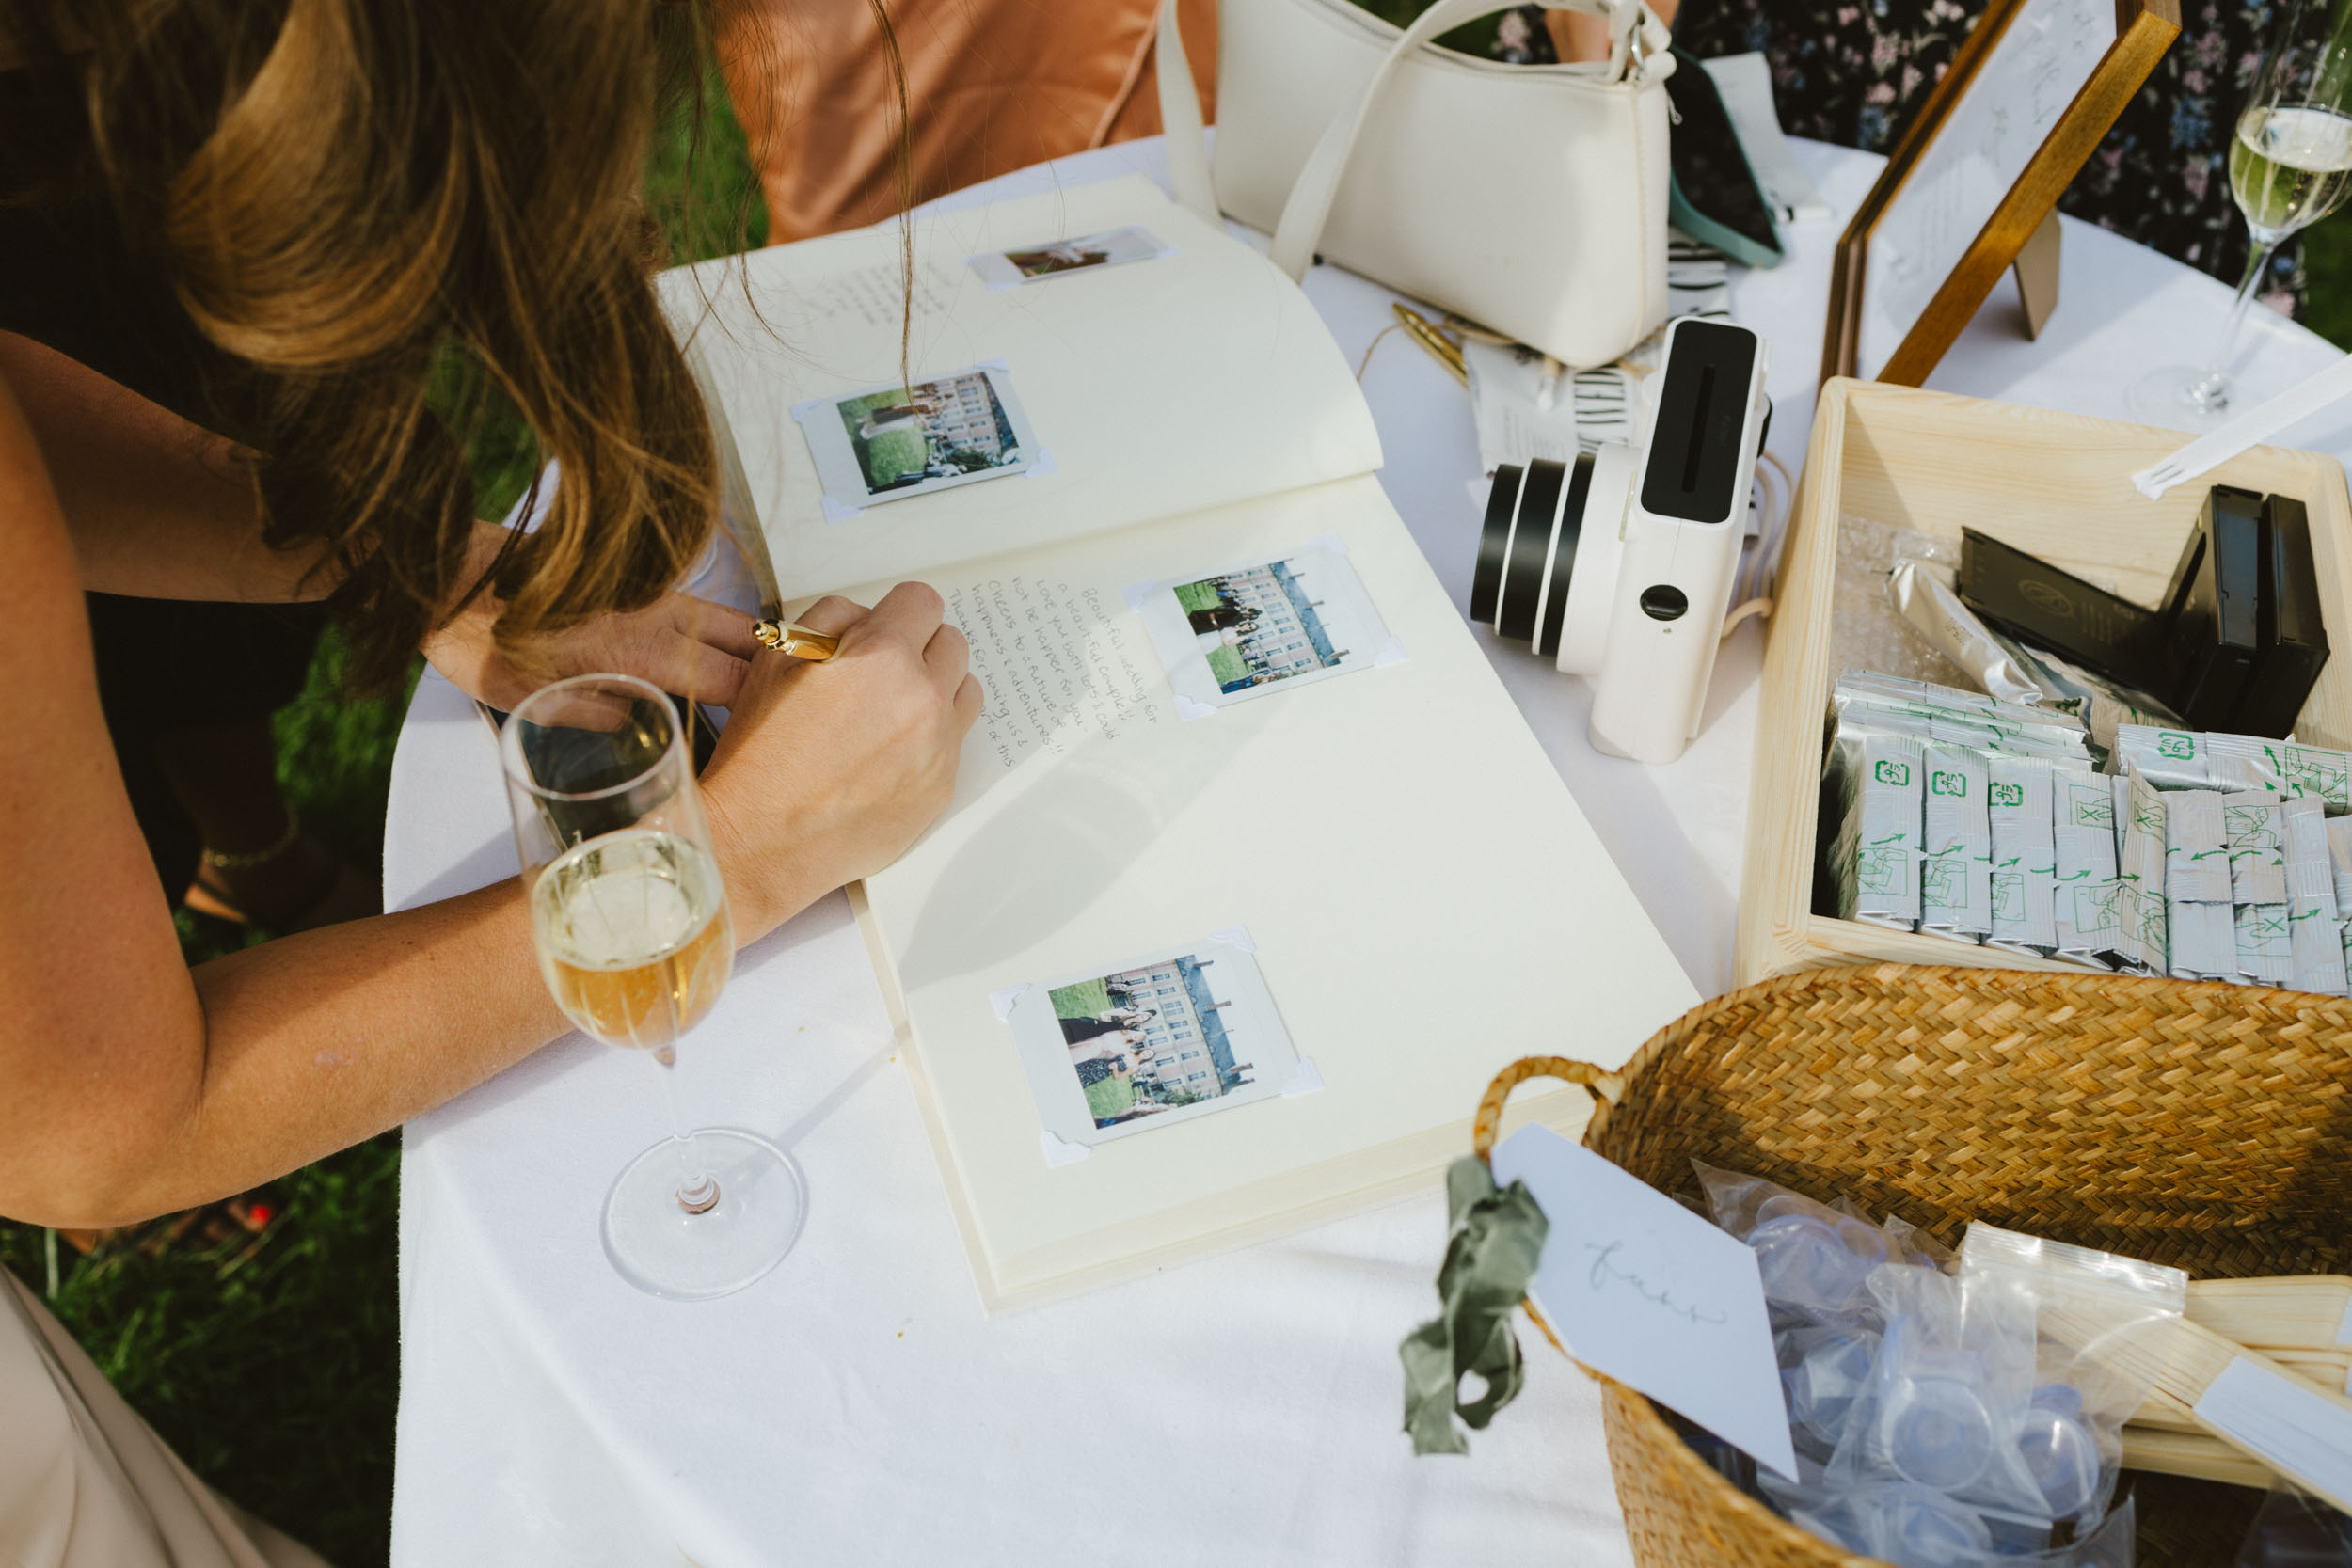 A guest at a wedding fills out a polaroid guest book with a meaningful note.